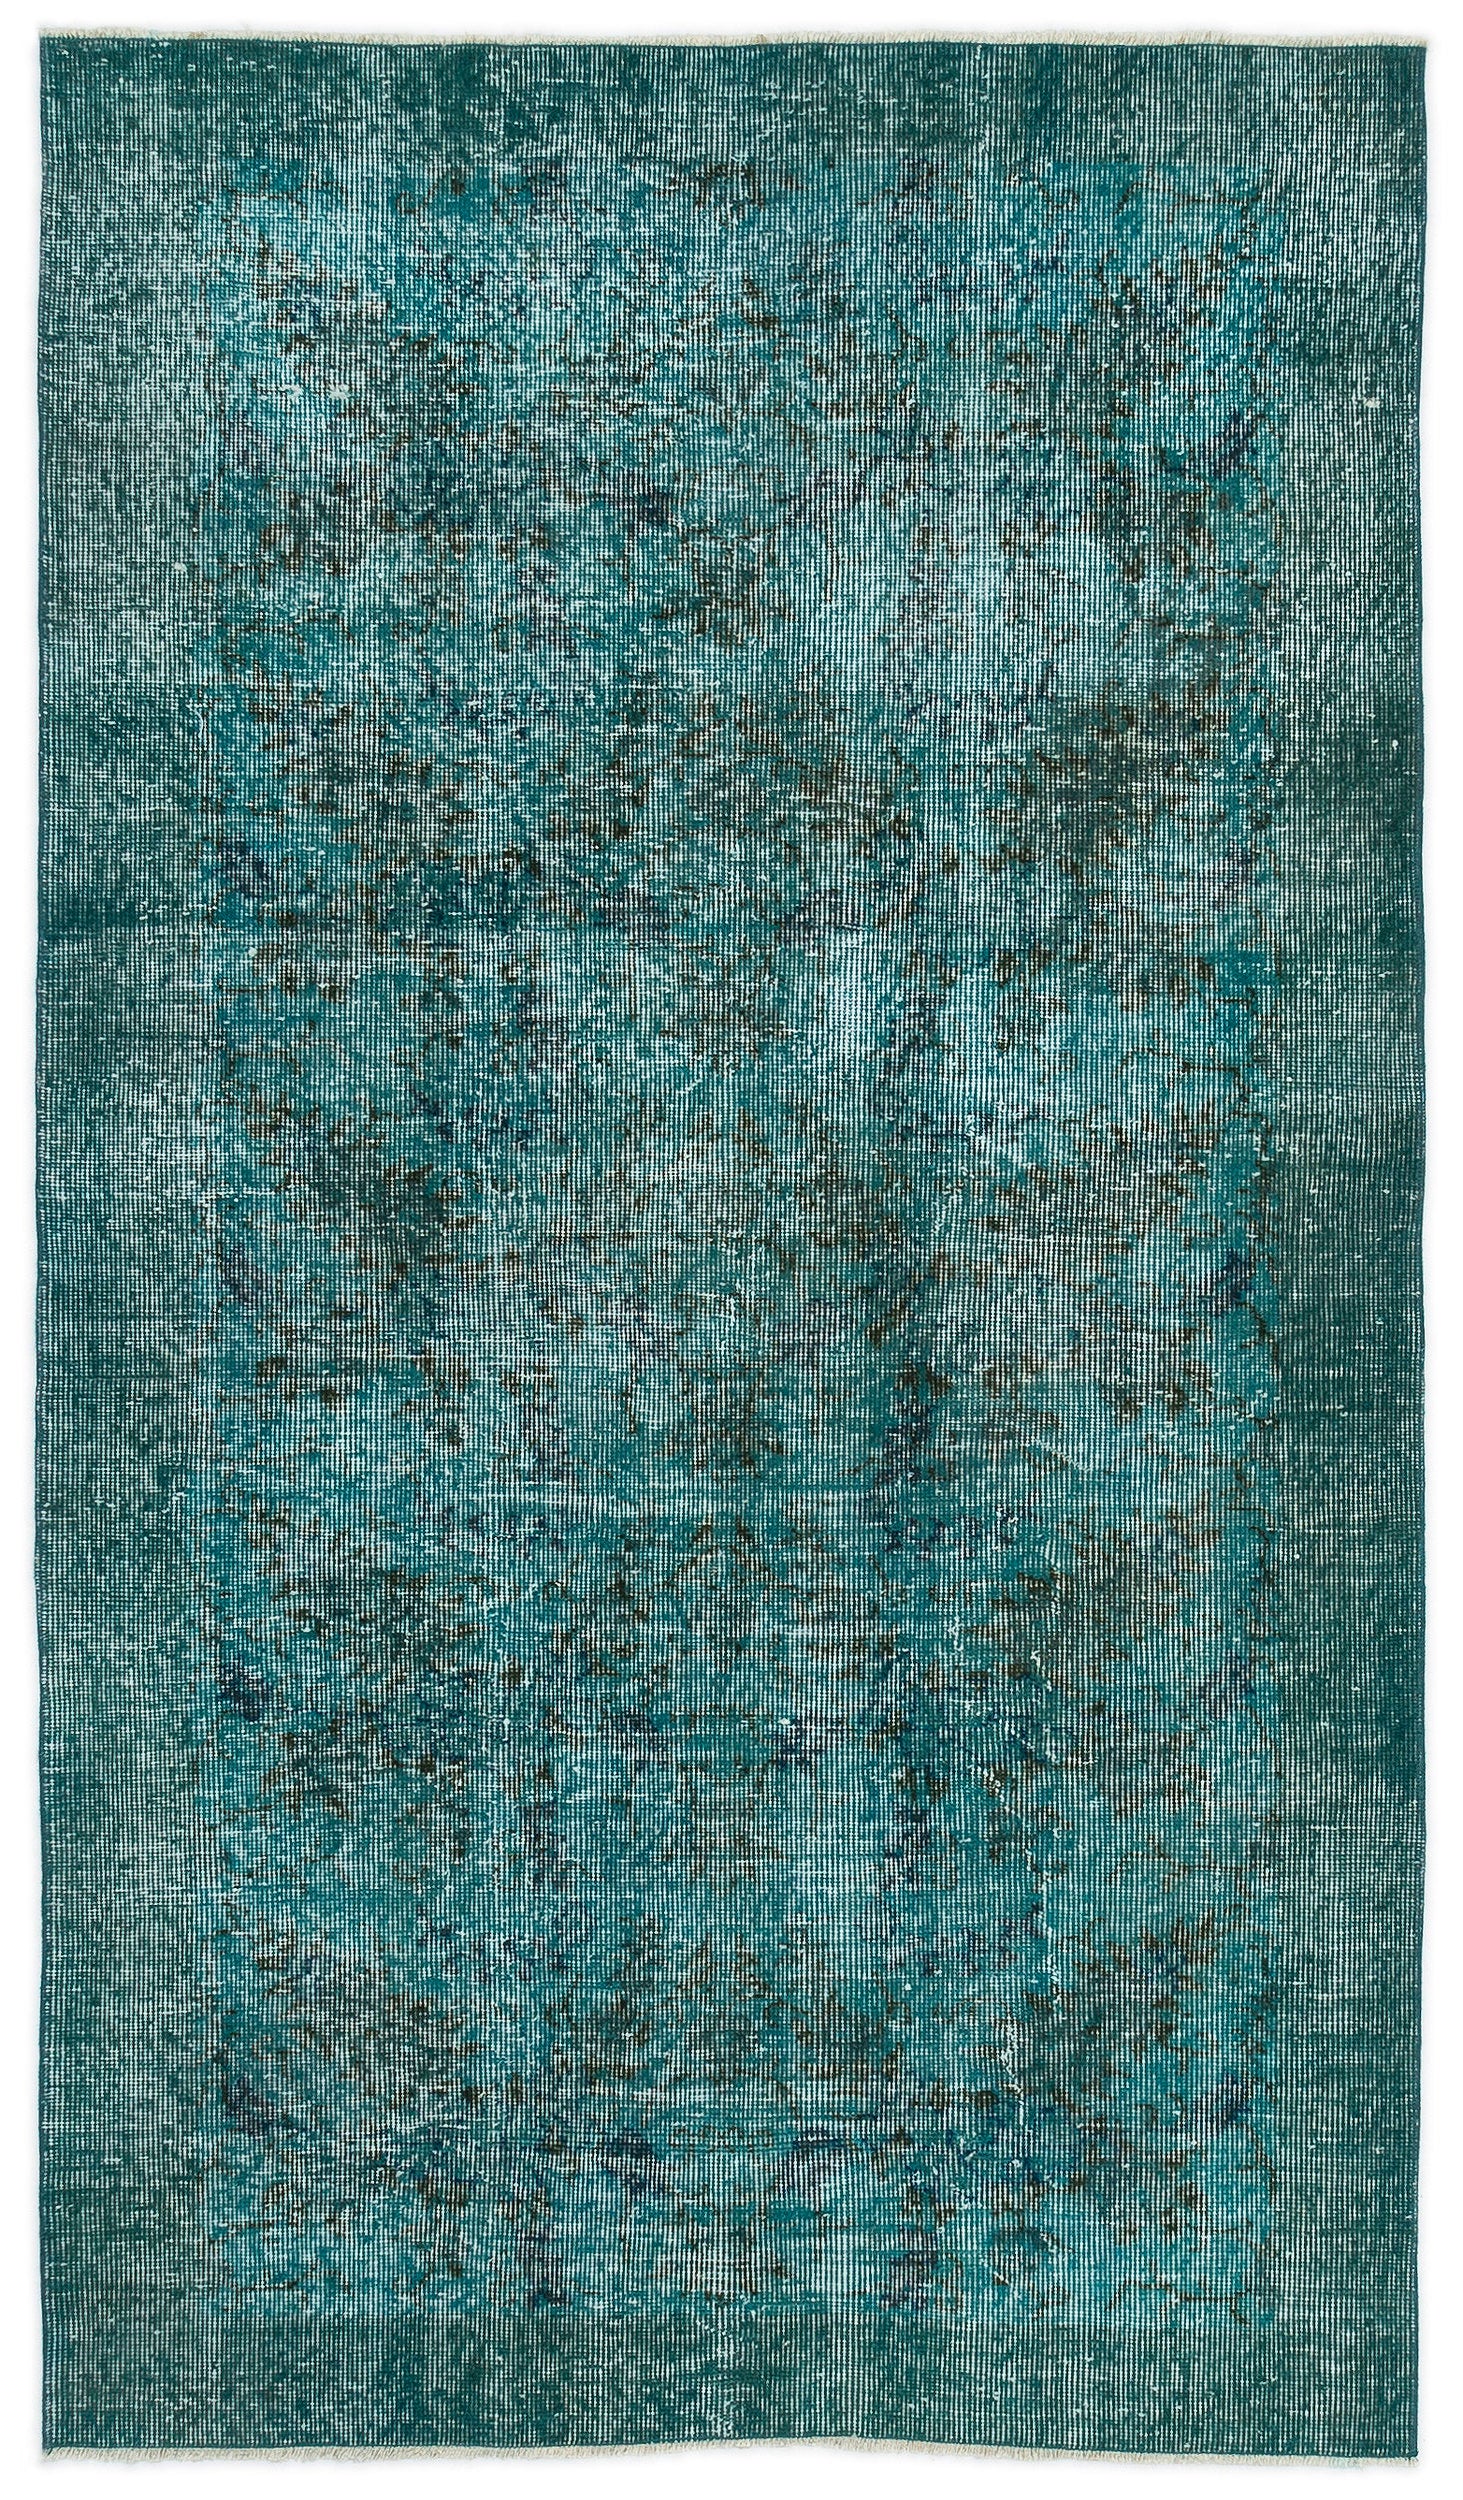 Turquoise  Over Dyed Vintage Rug 3'8'' x 6'5'' ft 111 x 196 cm